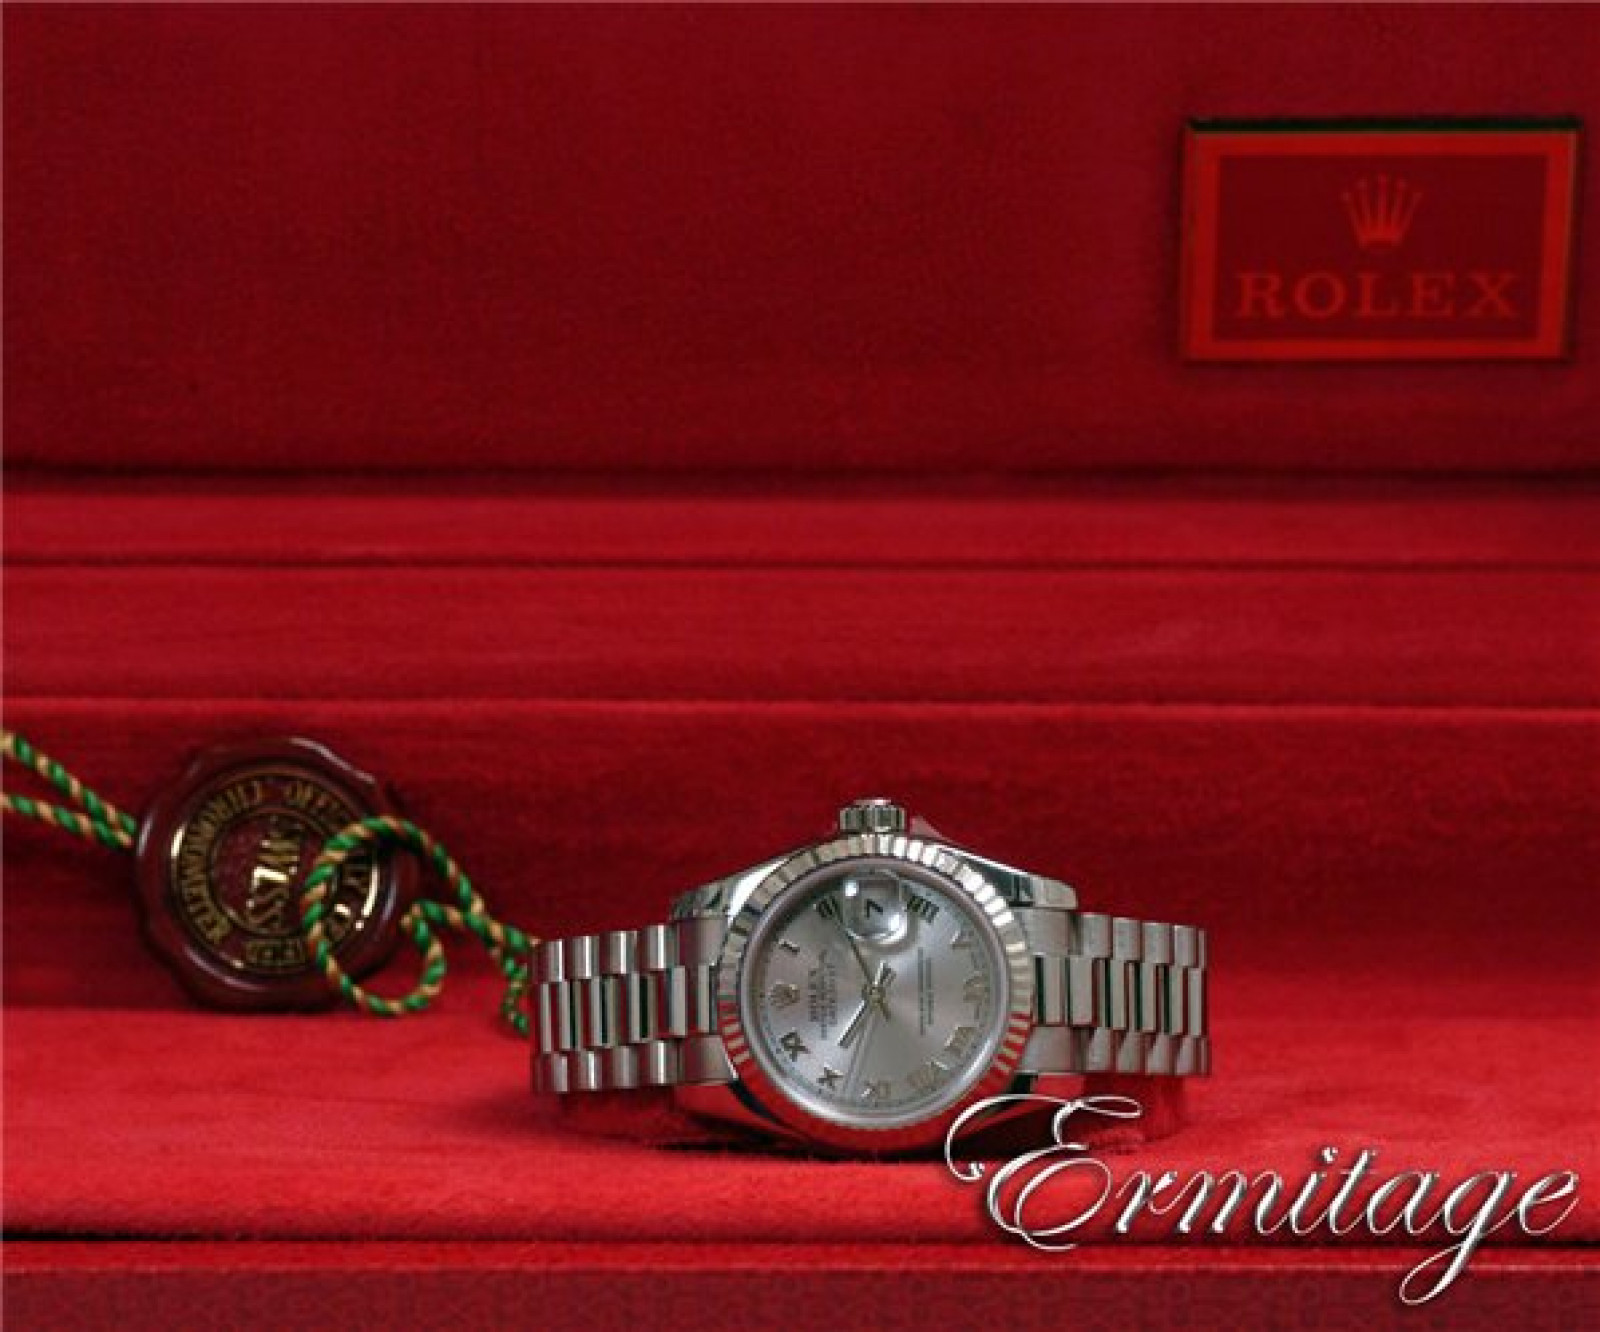 Rolex Datejust 179179 White Gold with Rhodium Dial & Roman Markers